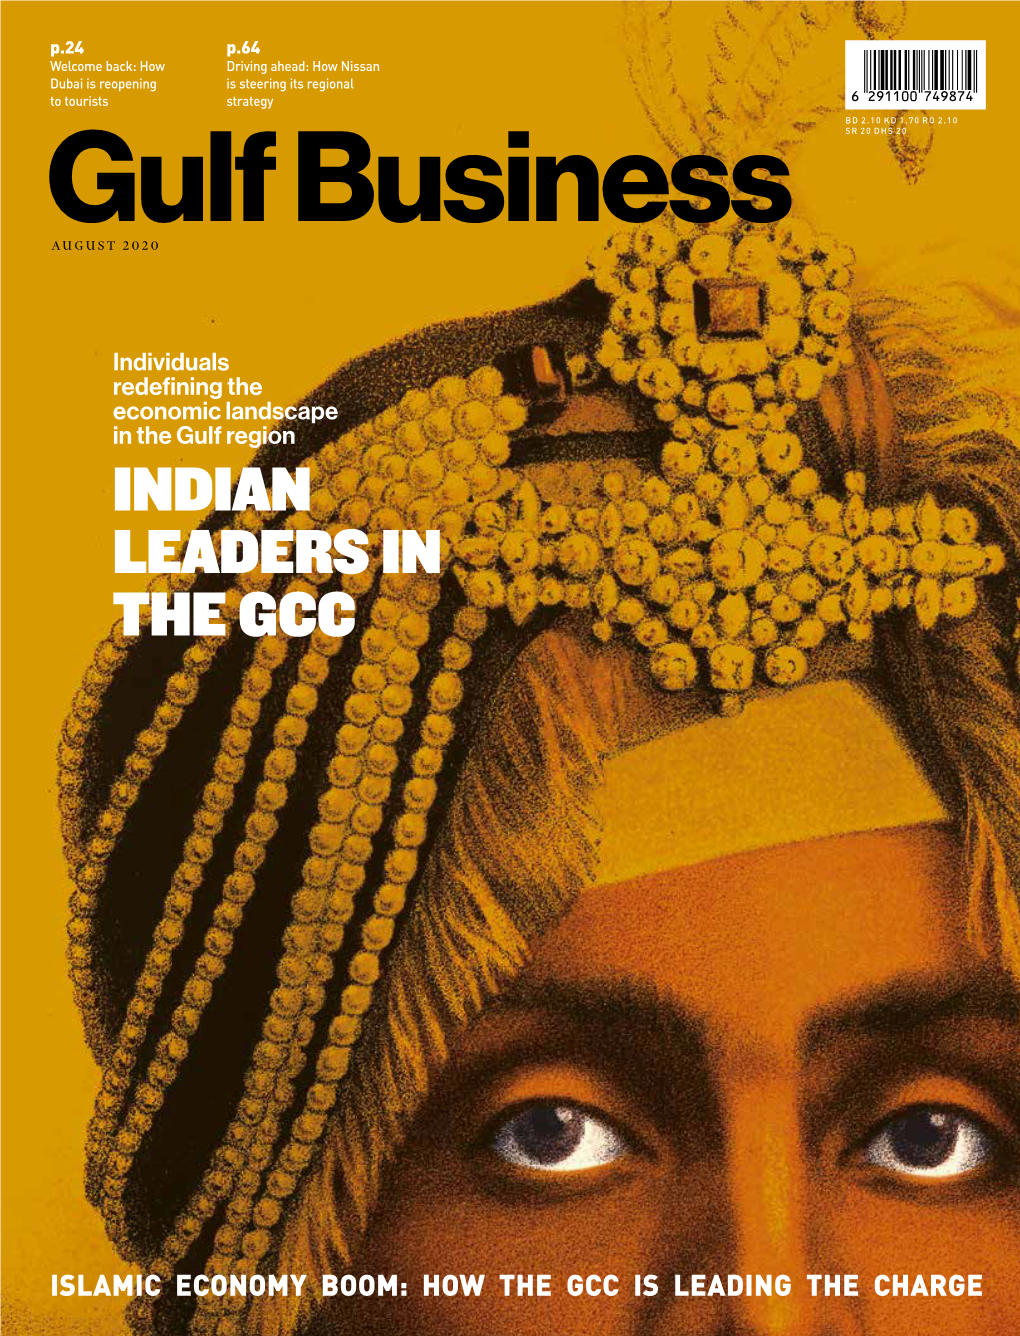 Gulf Business Magazine Is Available in These Exclusive Hotels and Many More